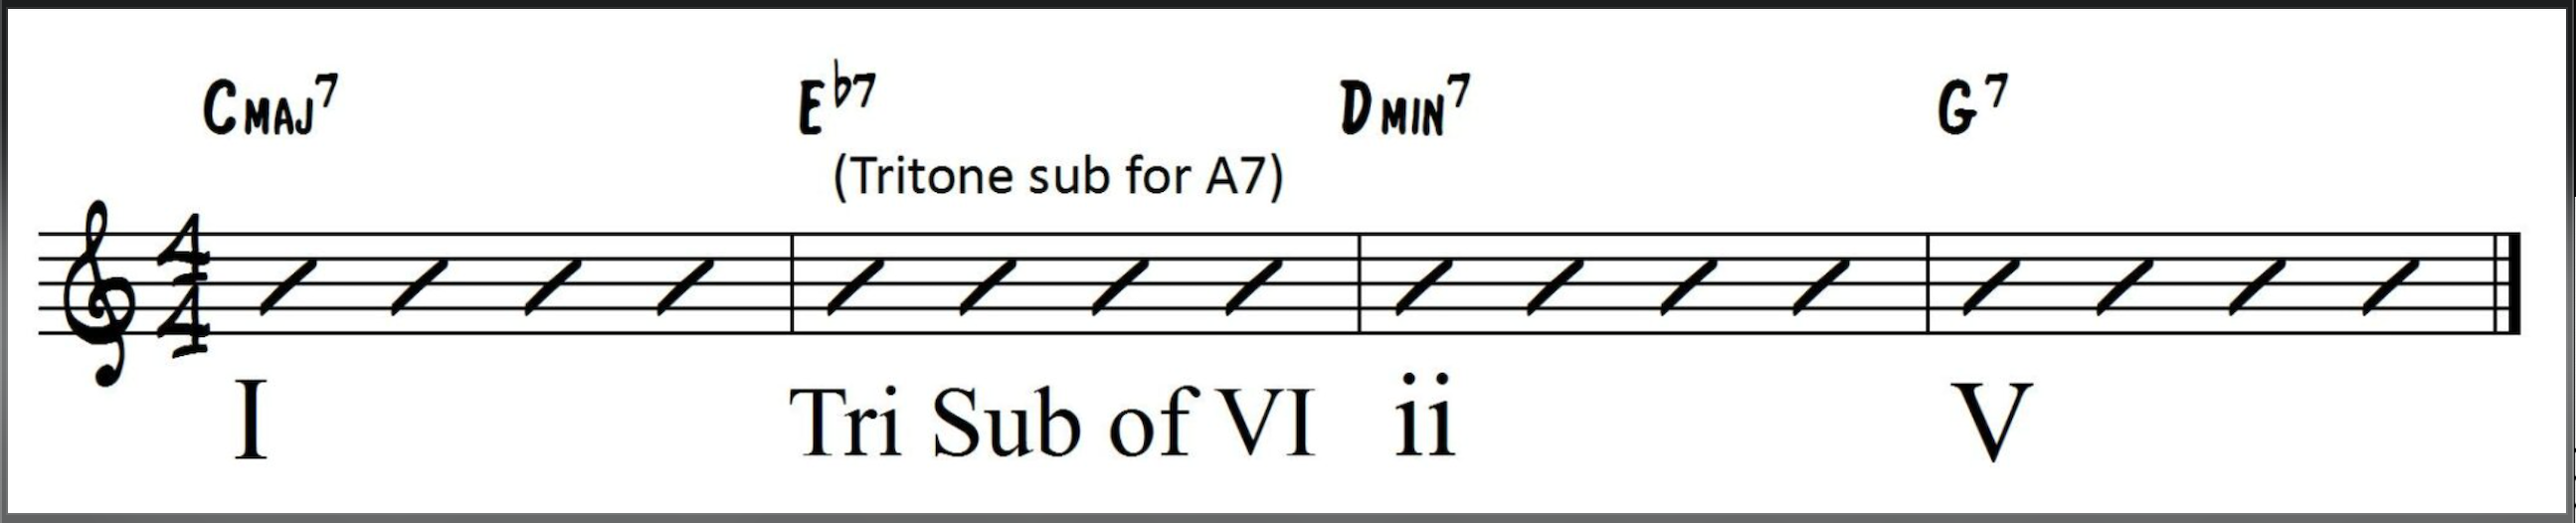 Tritone Substitution of VI in a chord progression in the key of C major